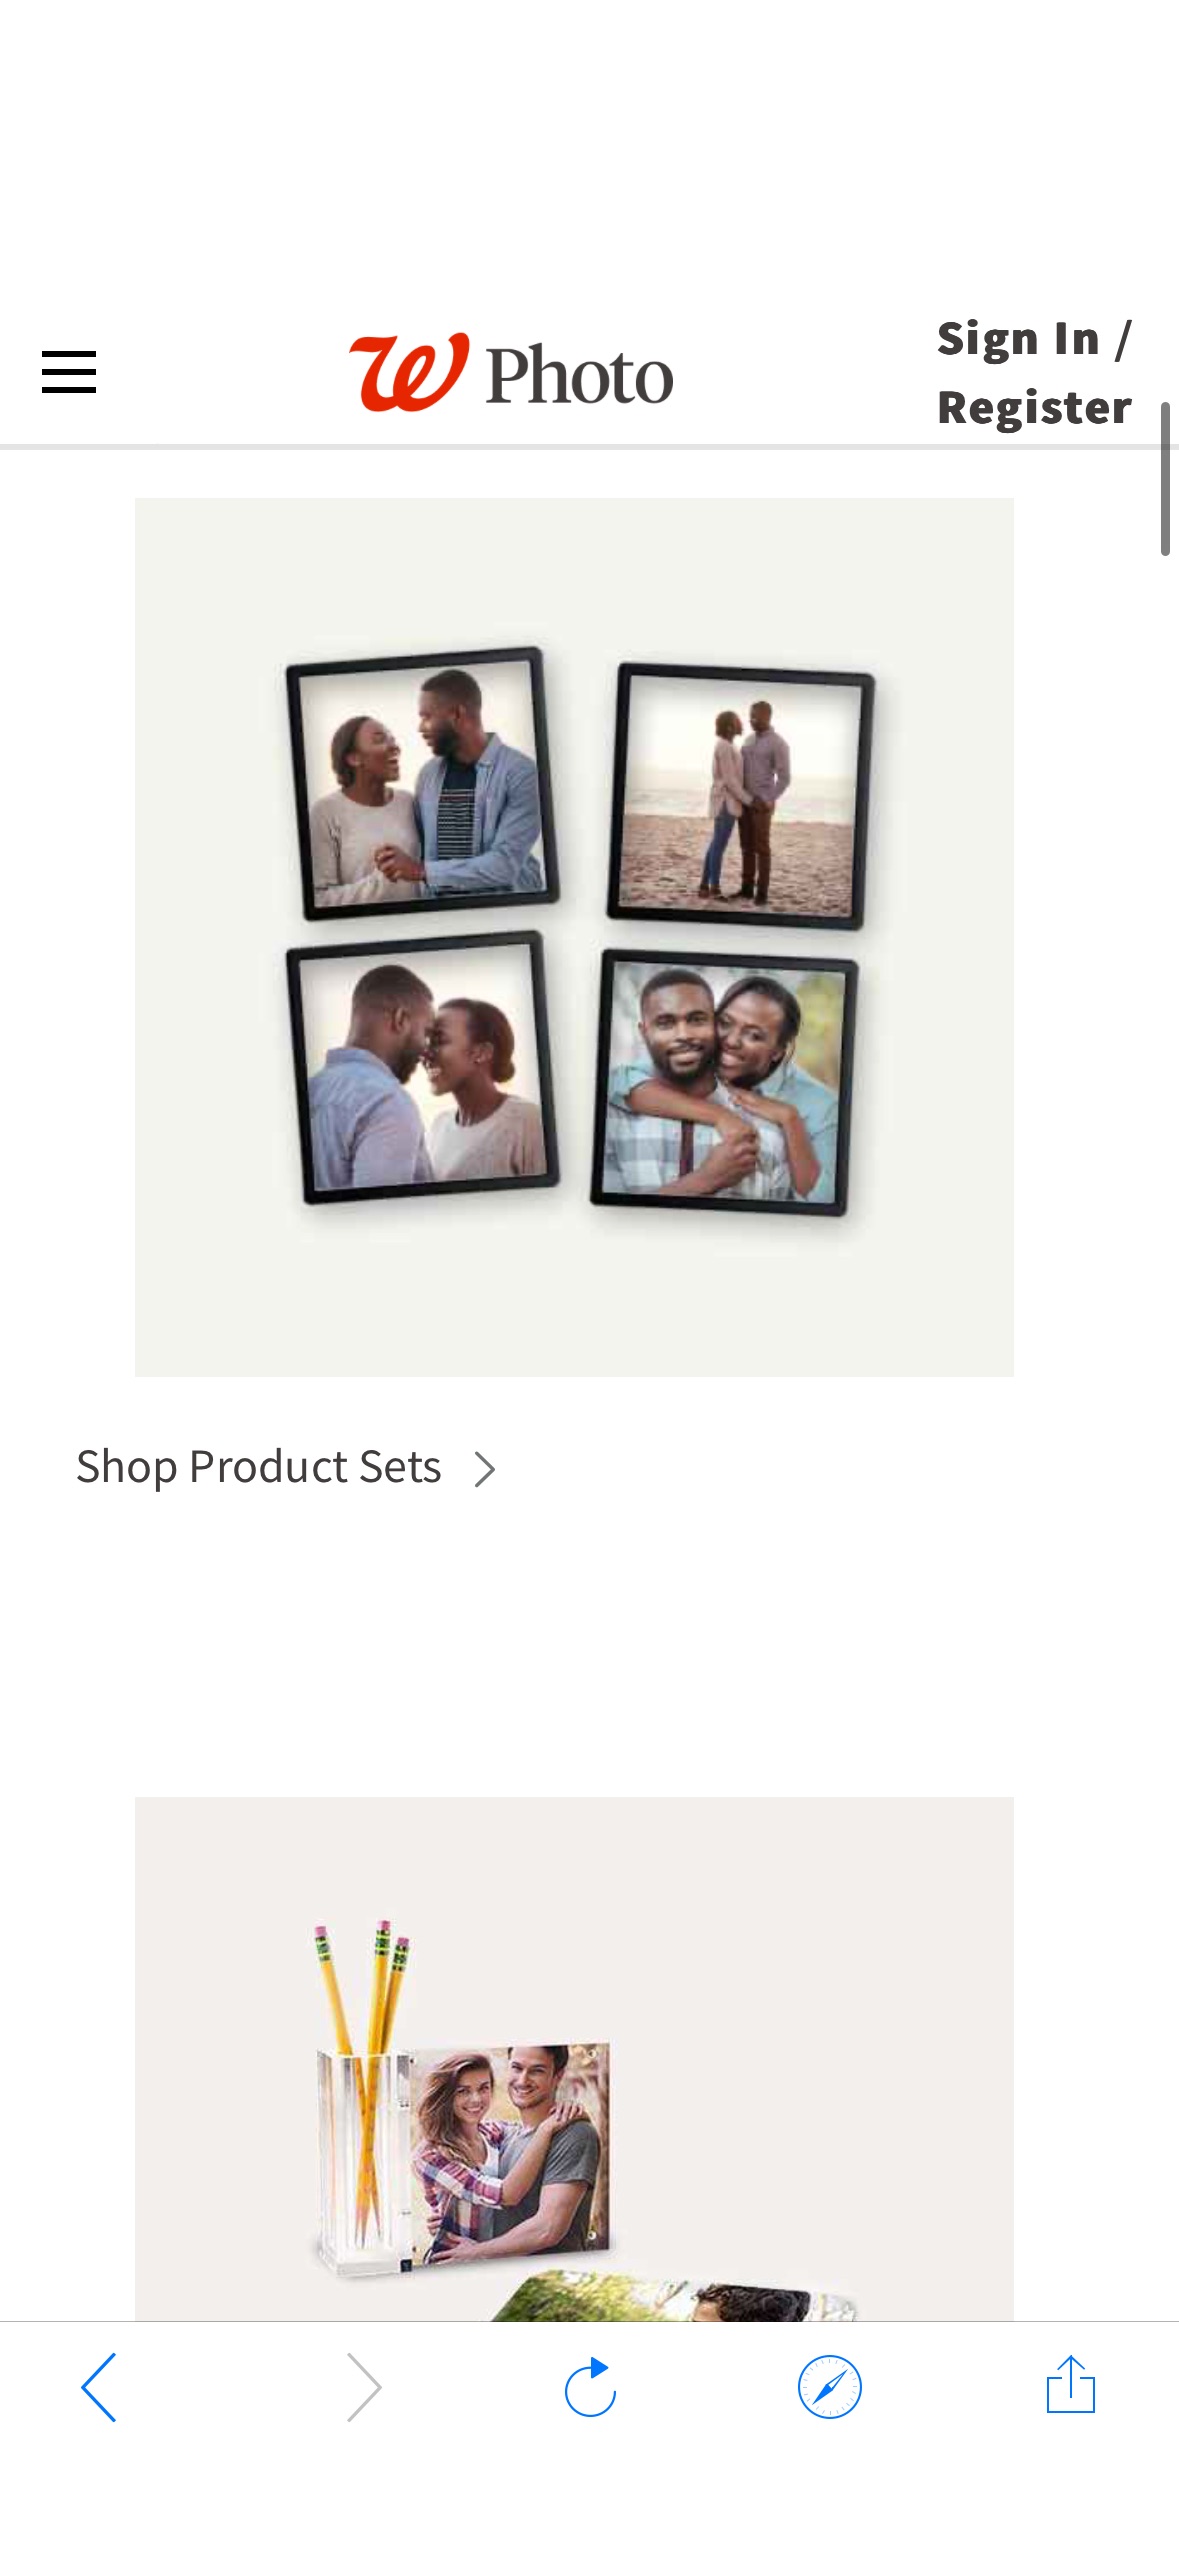 Walgreens Photo Magnets Now 75% Off: As Low As 79¢！Grab 4×6 magnets for just 79¢ using code: MAGNET79 at checkout, no limit that we can see but it does end today, April 24th!